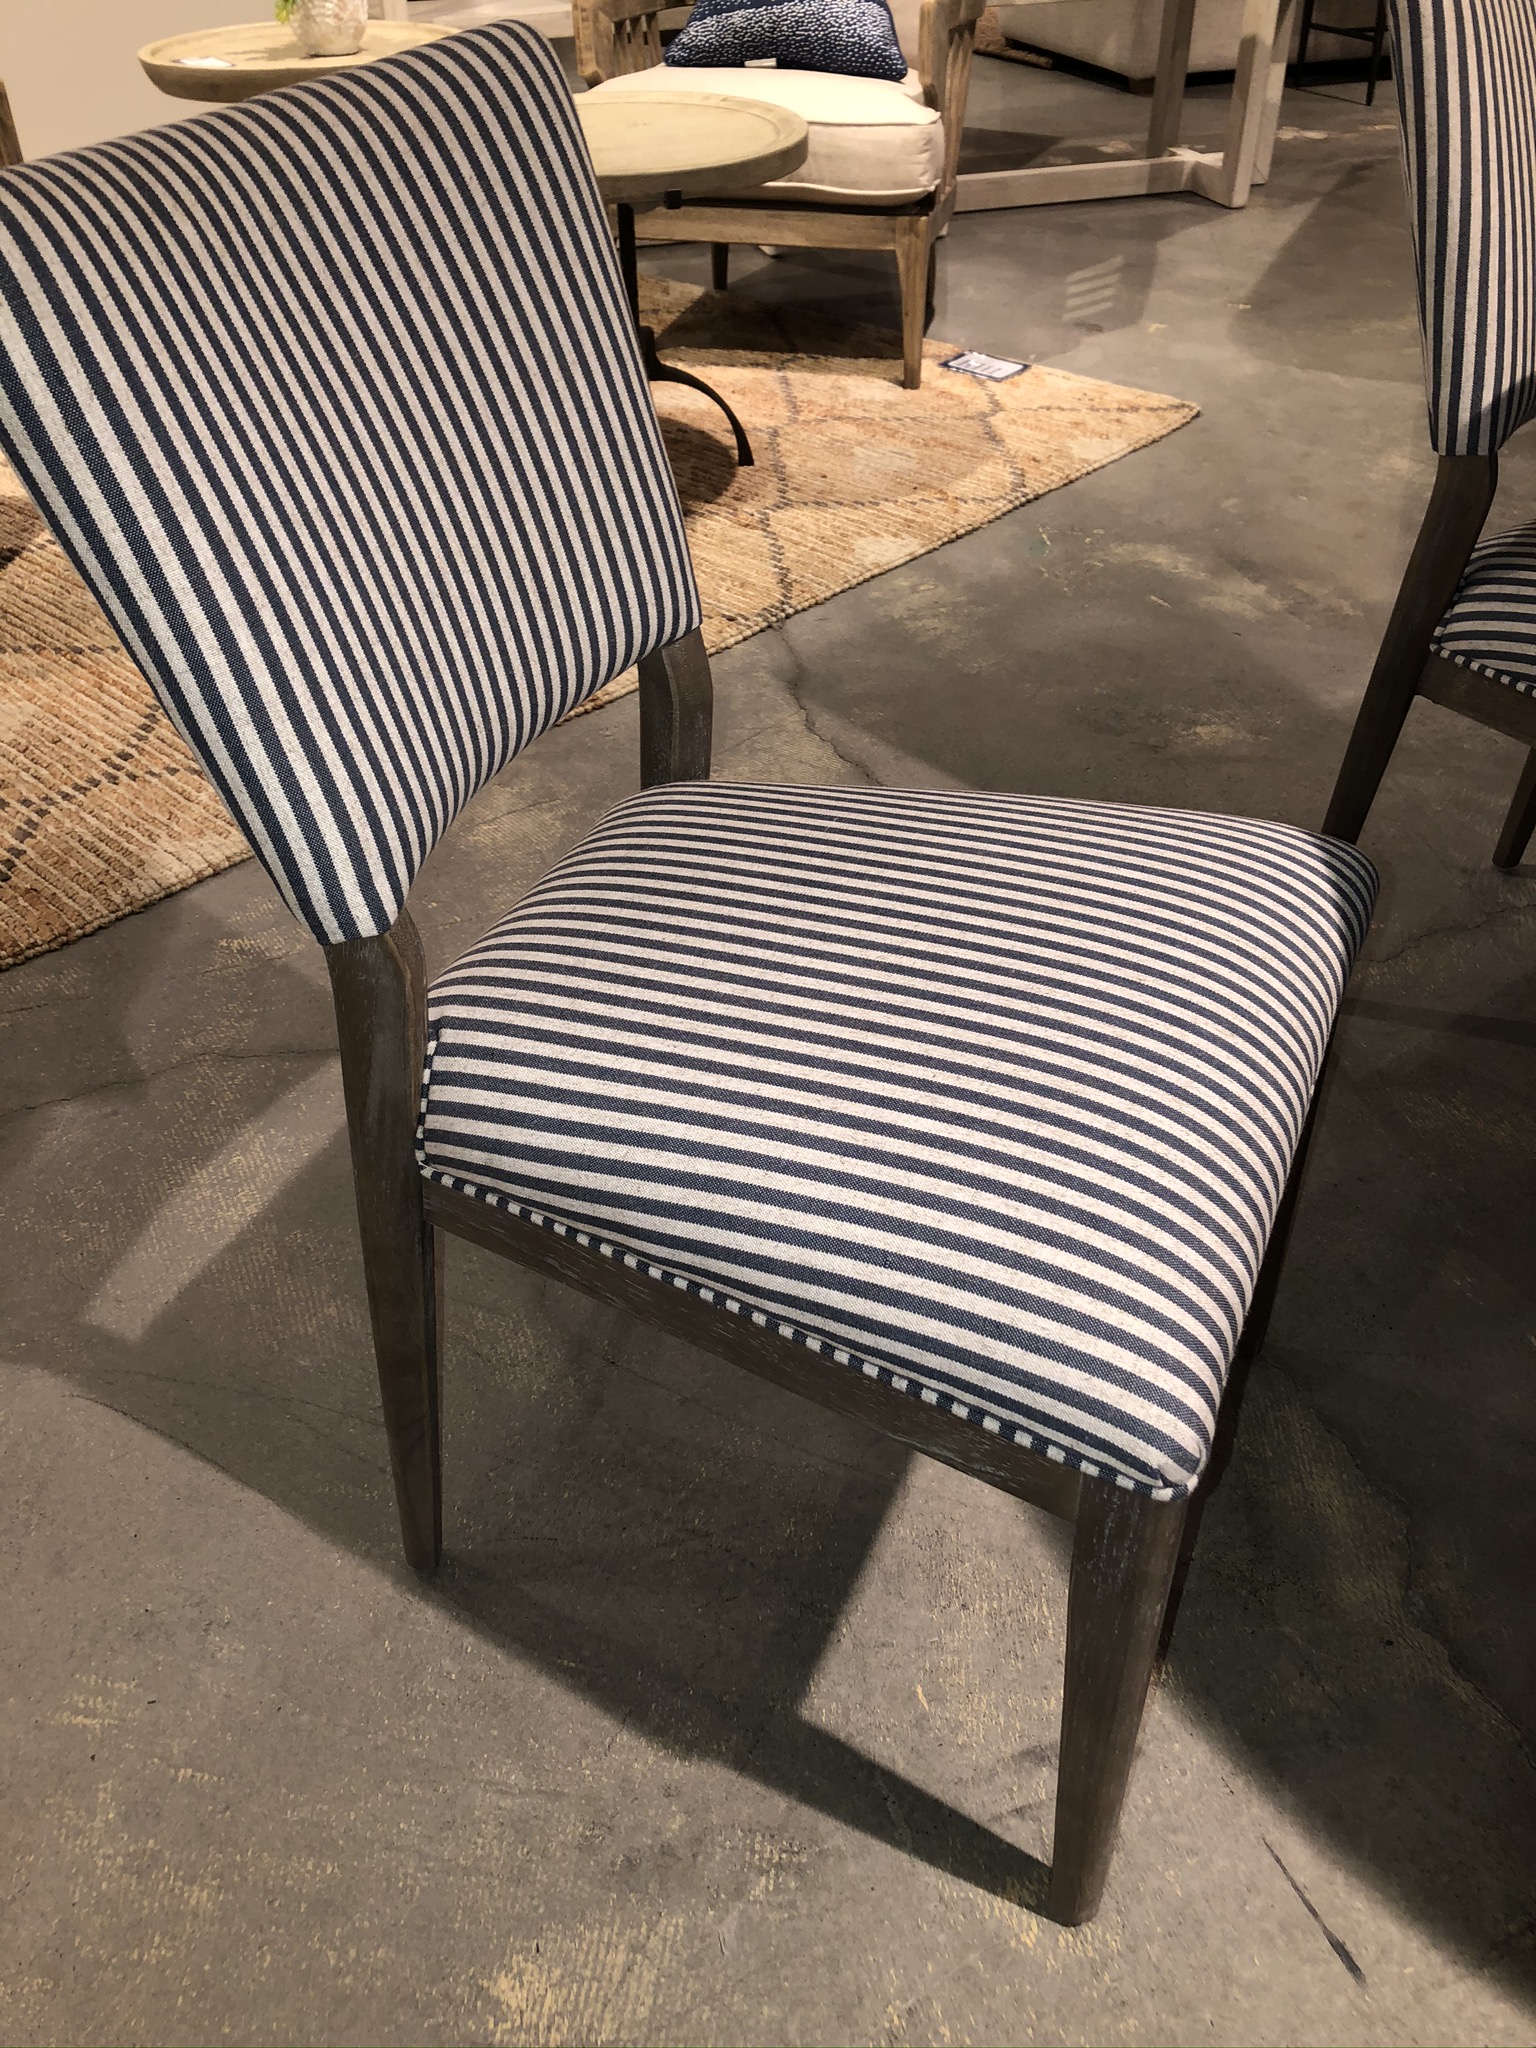 Blue and White Striped Upholstered Dining Chair Mecox Gardens